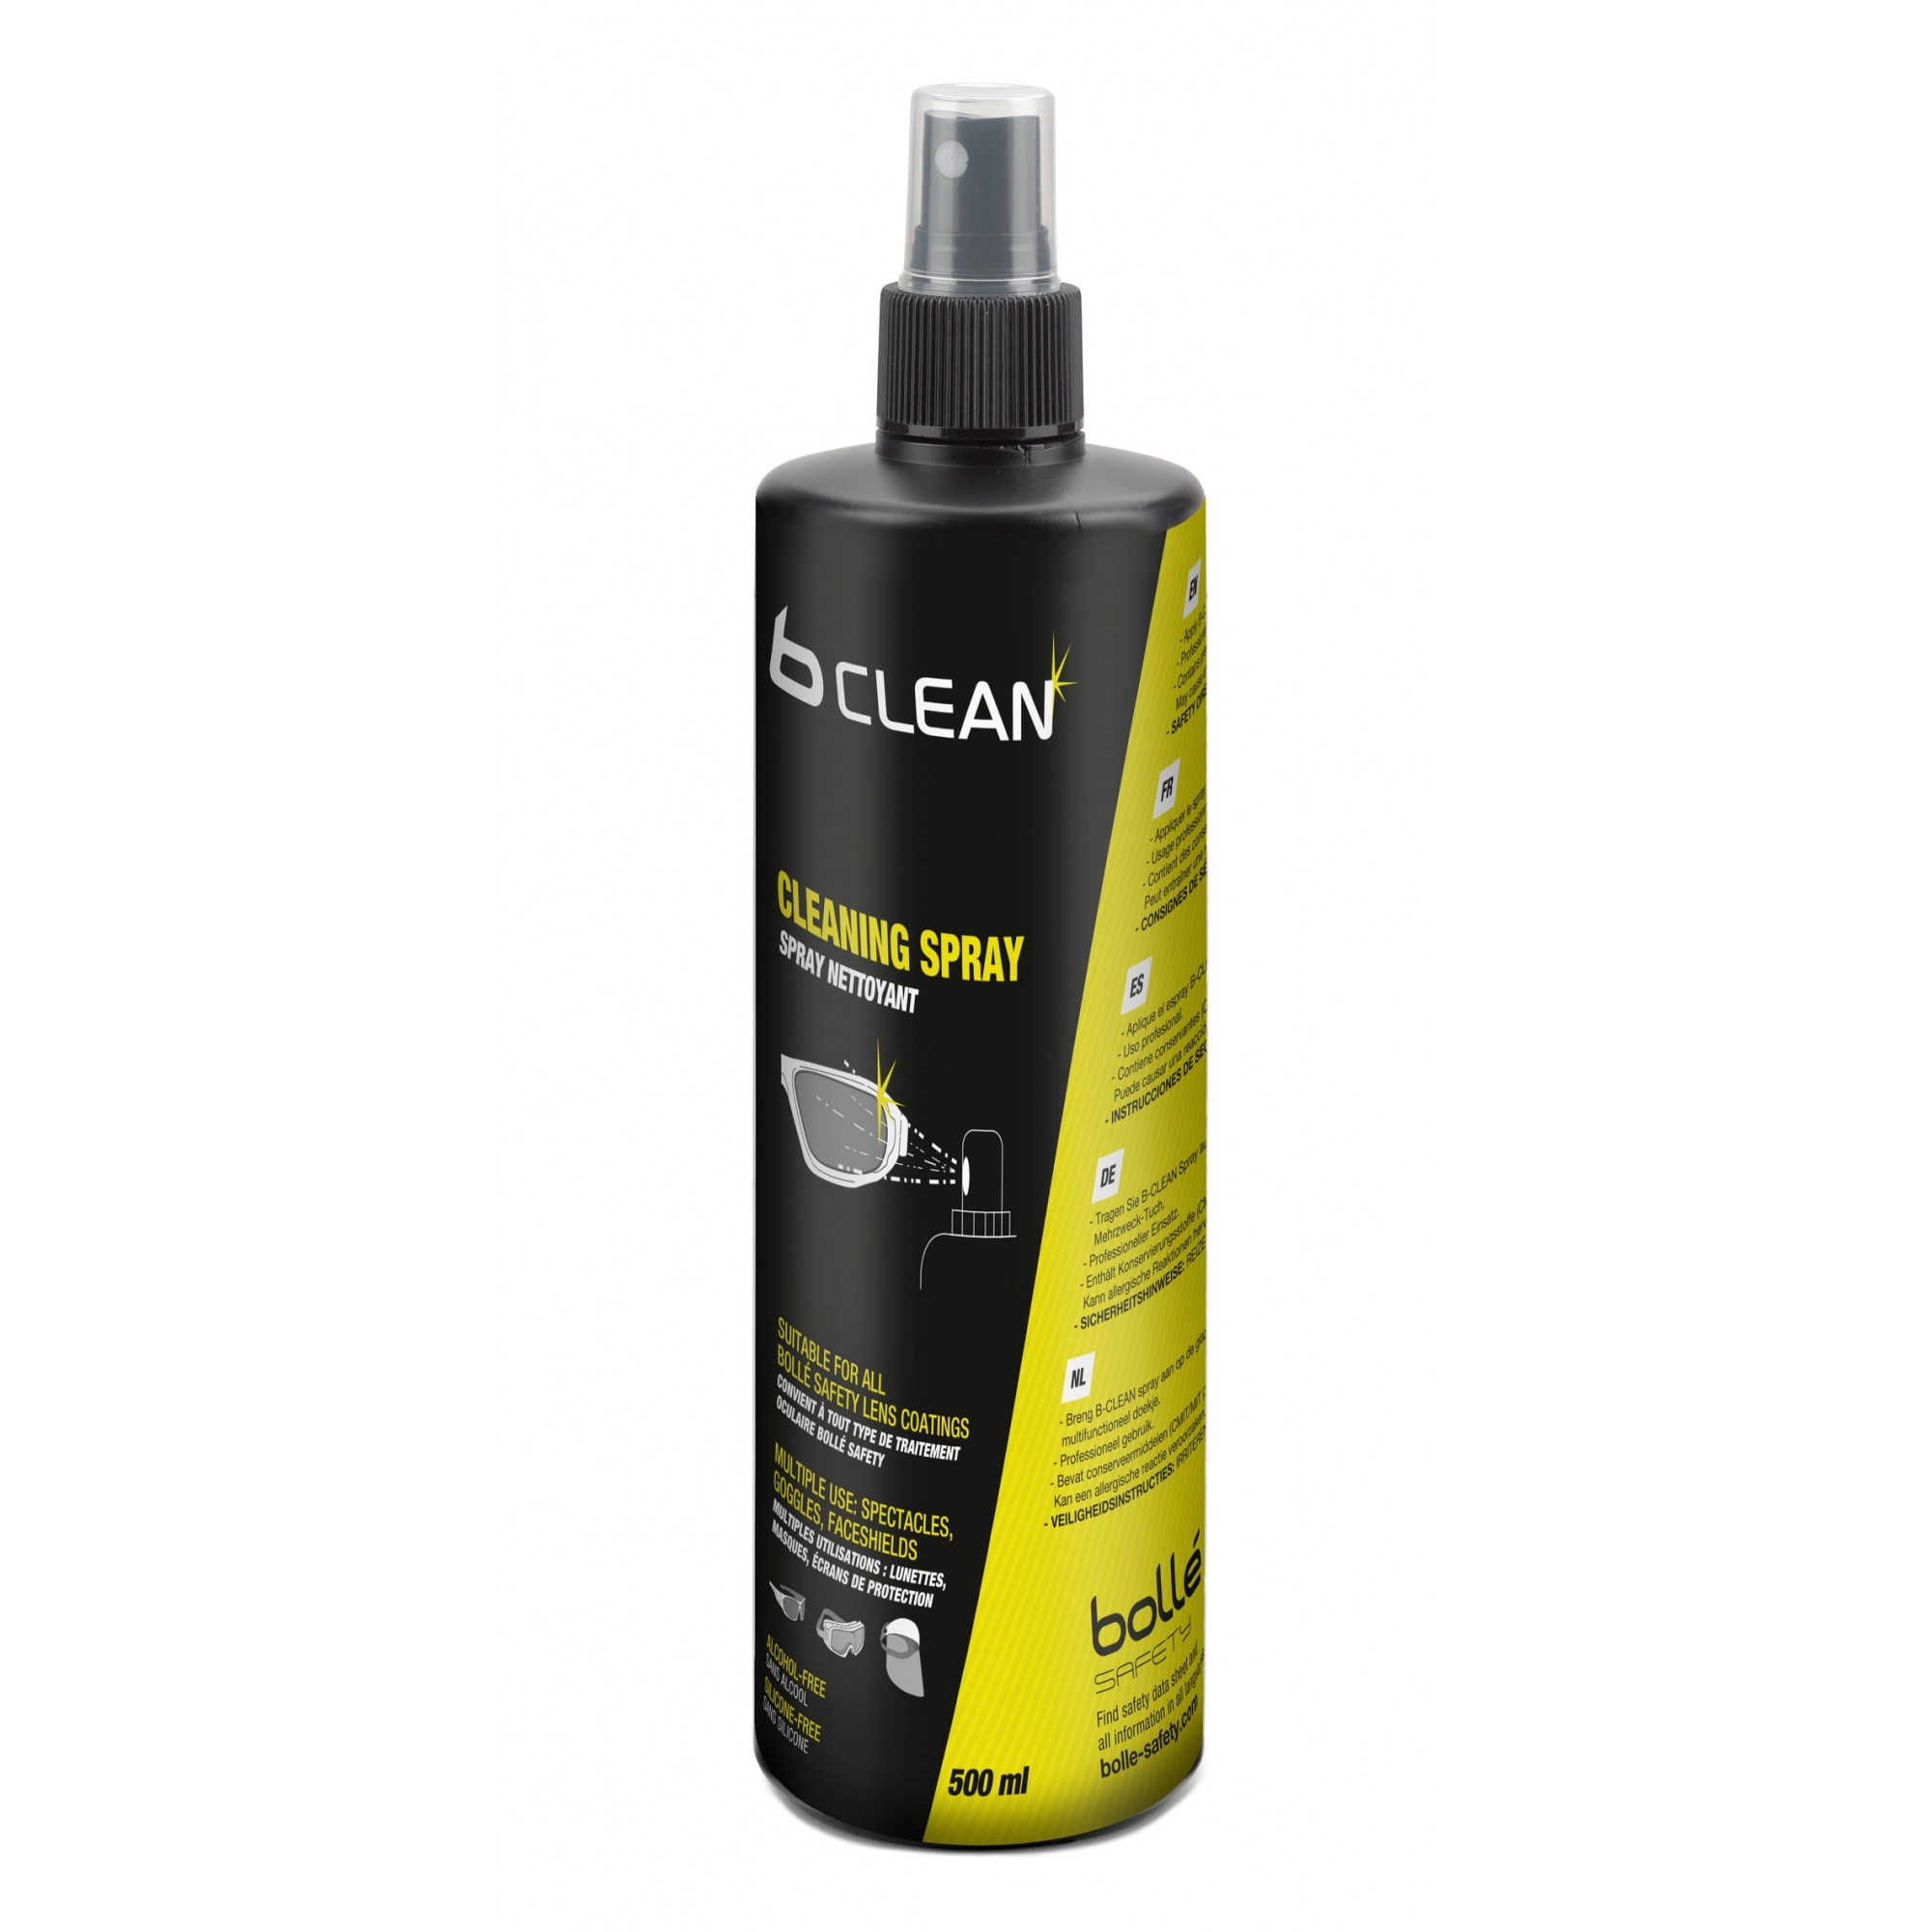 Spray nettoyant 500ml pour lunettes et masques - BOLLE - BOLLE SAFETY